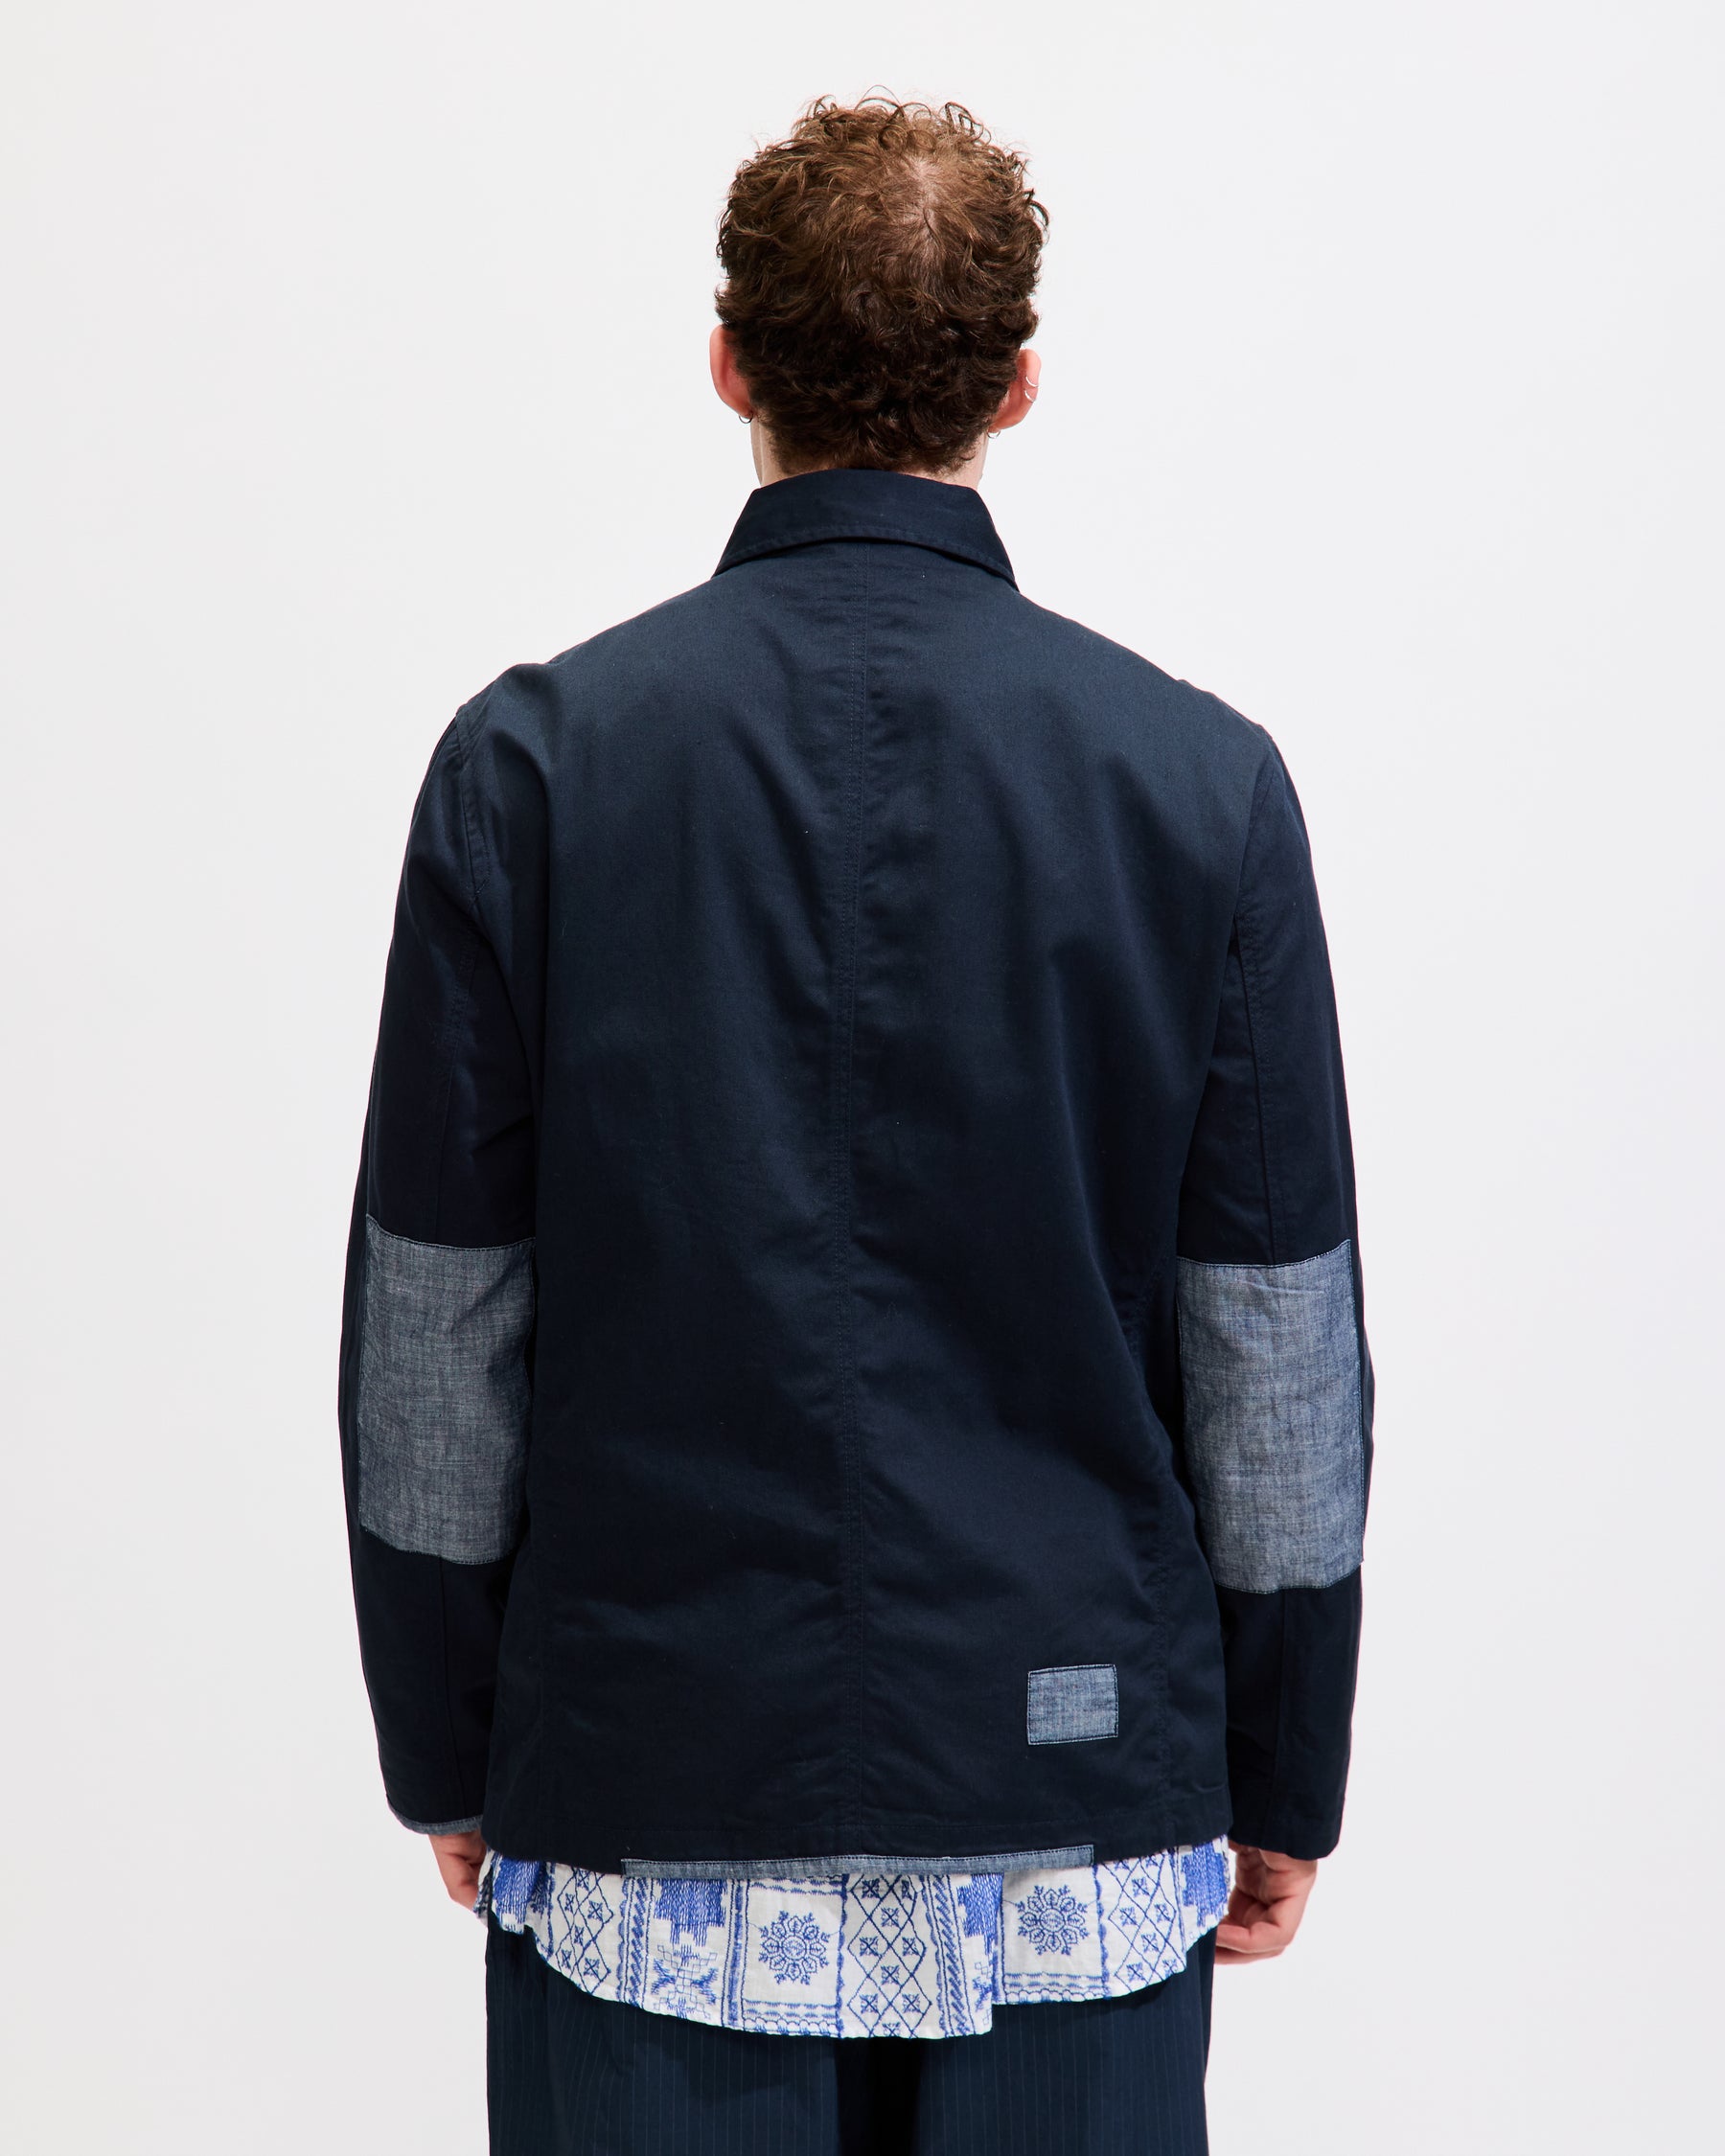 Patched Bakers Jacket in Navy